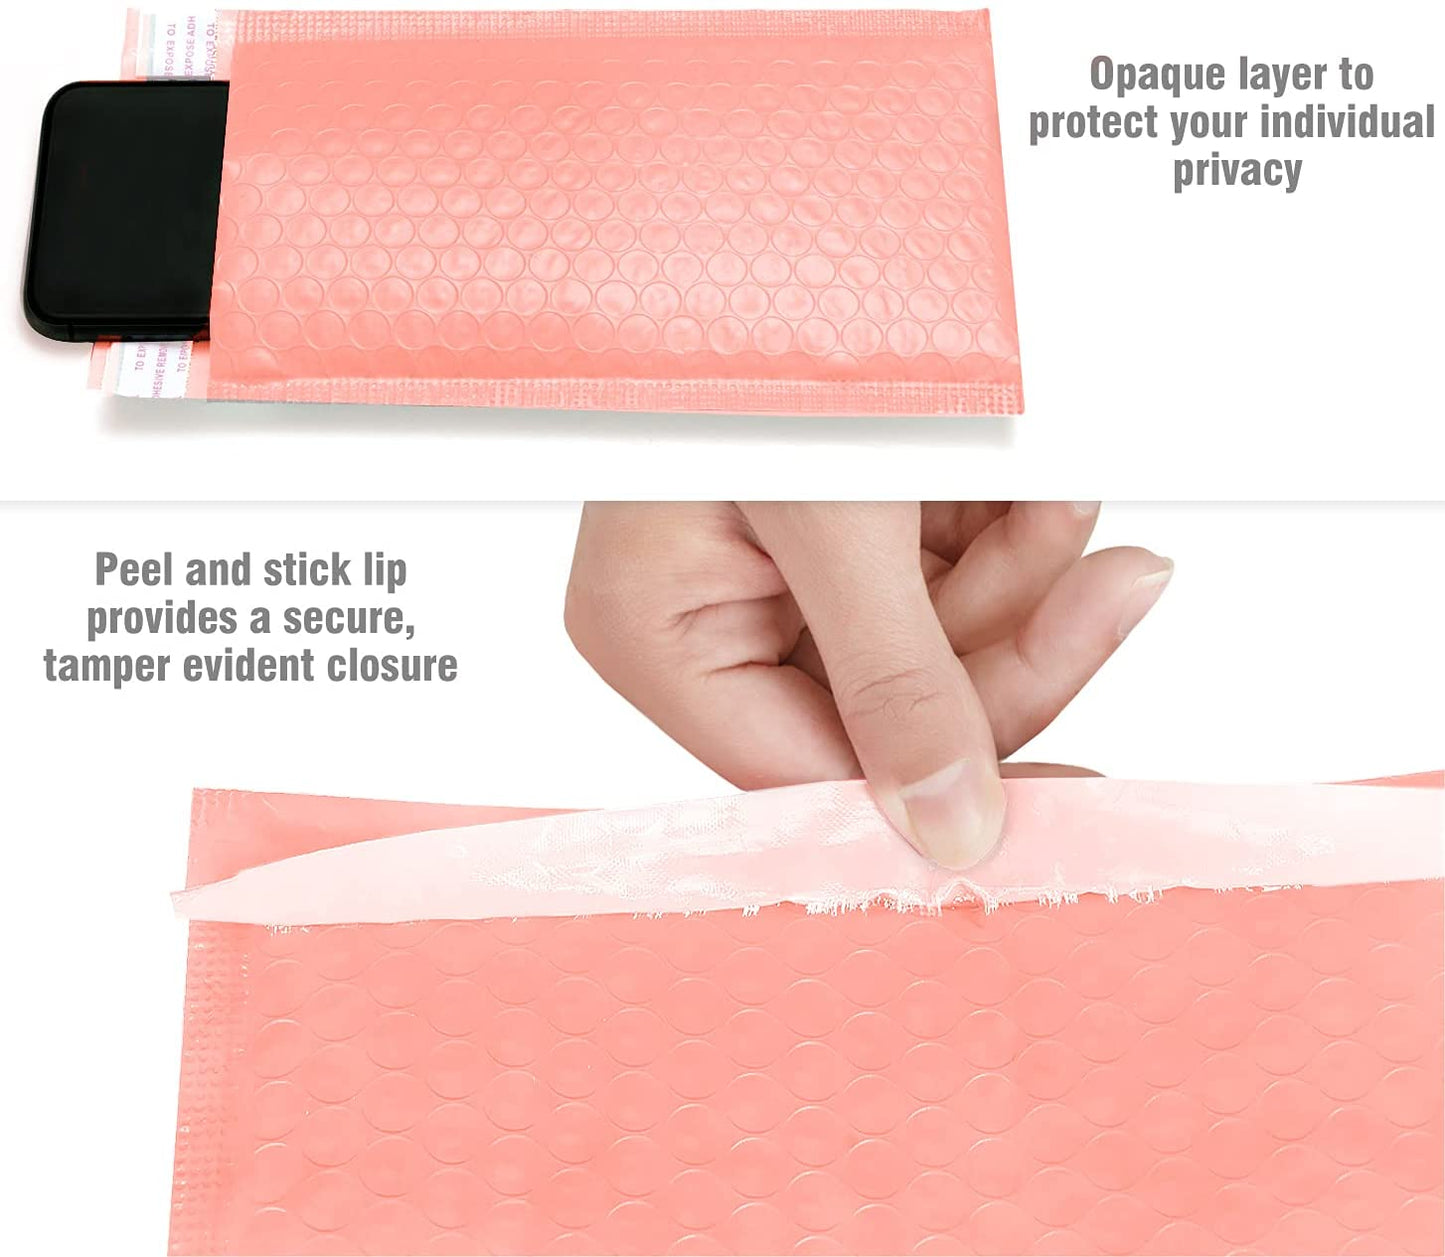 (5 PACK)  6x10 Peach Pink Bubble Mailer